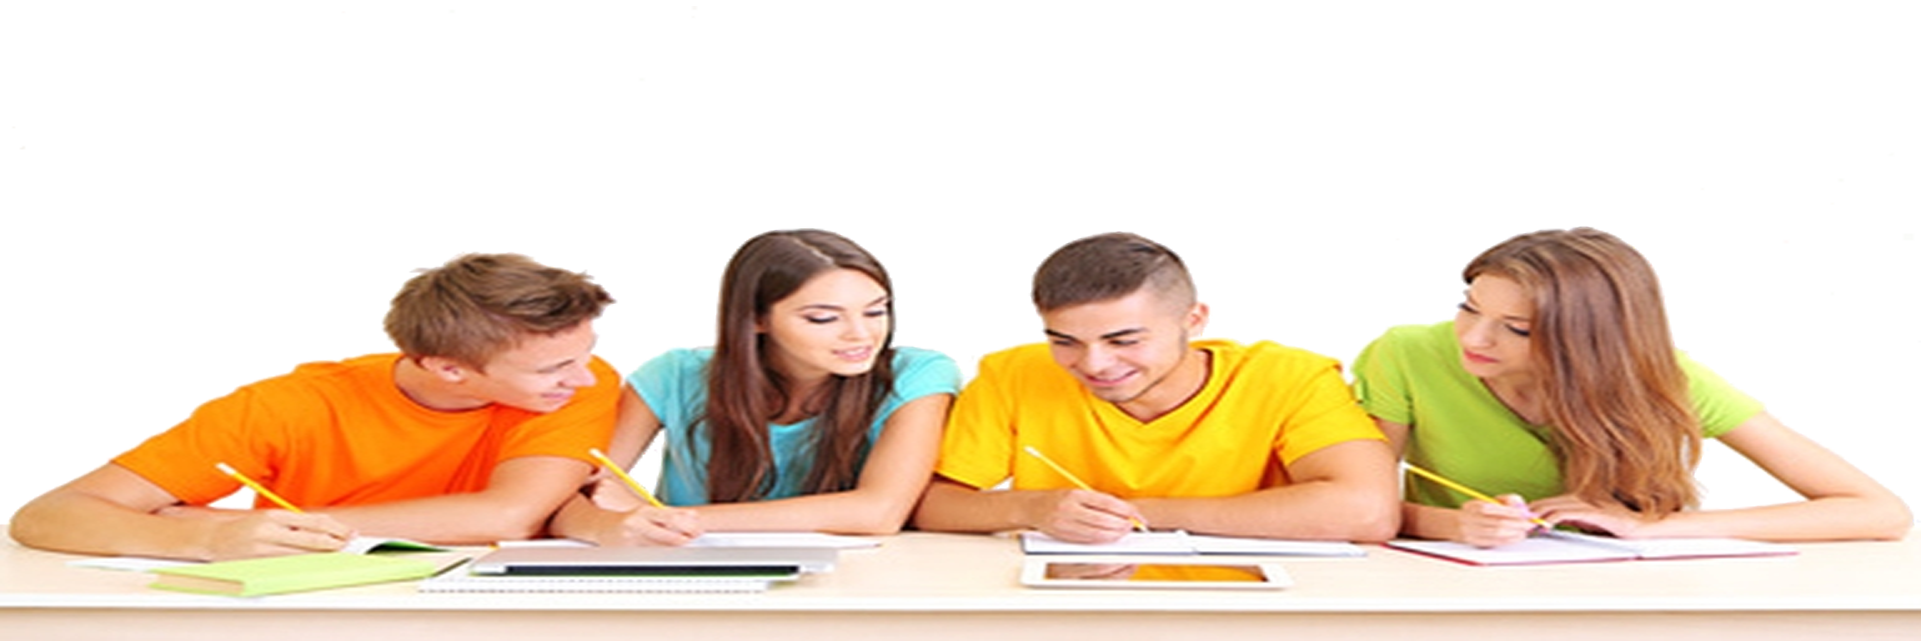 study clipart college study